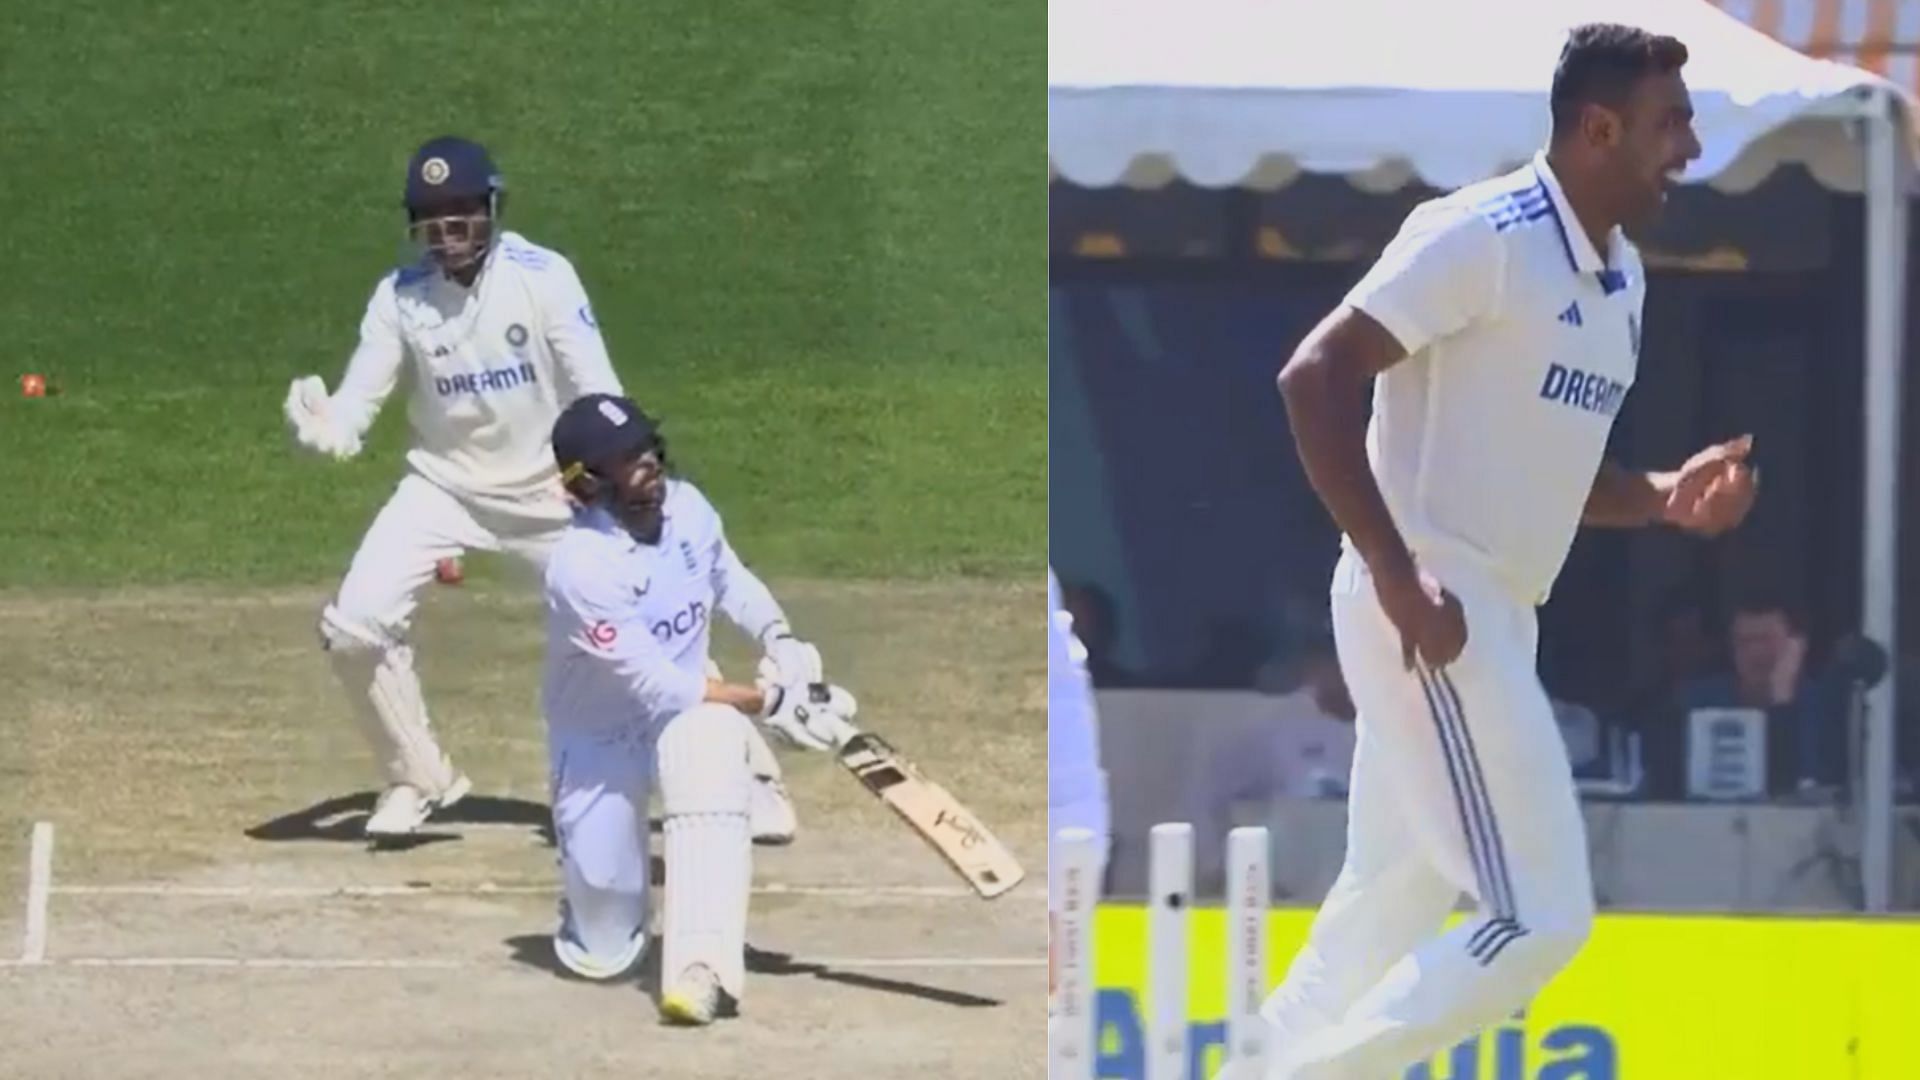 [Watch] Ravichandran Ashwin castles Ben Foakes to complete 36th five-wicket haul in his 100th Test for India on Day 3 of 5th Test vs England